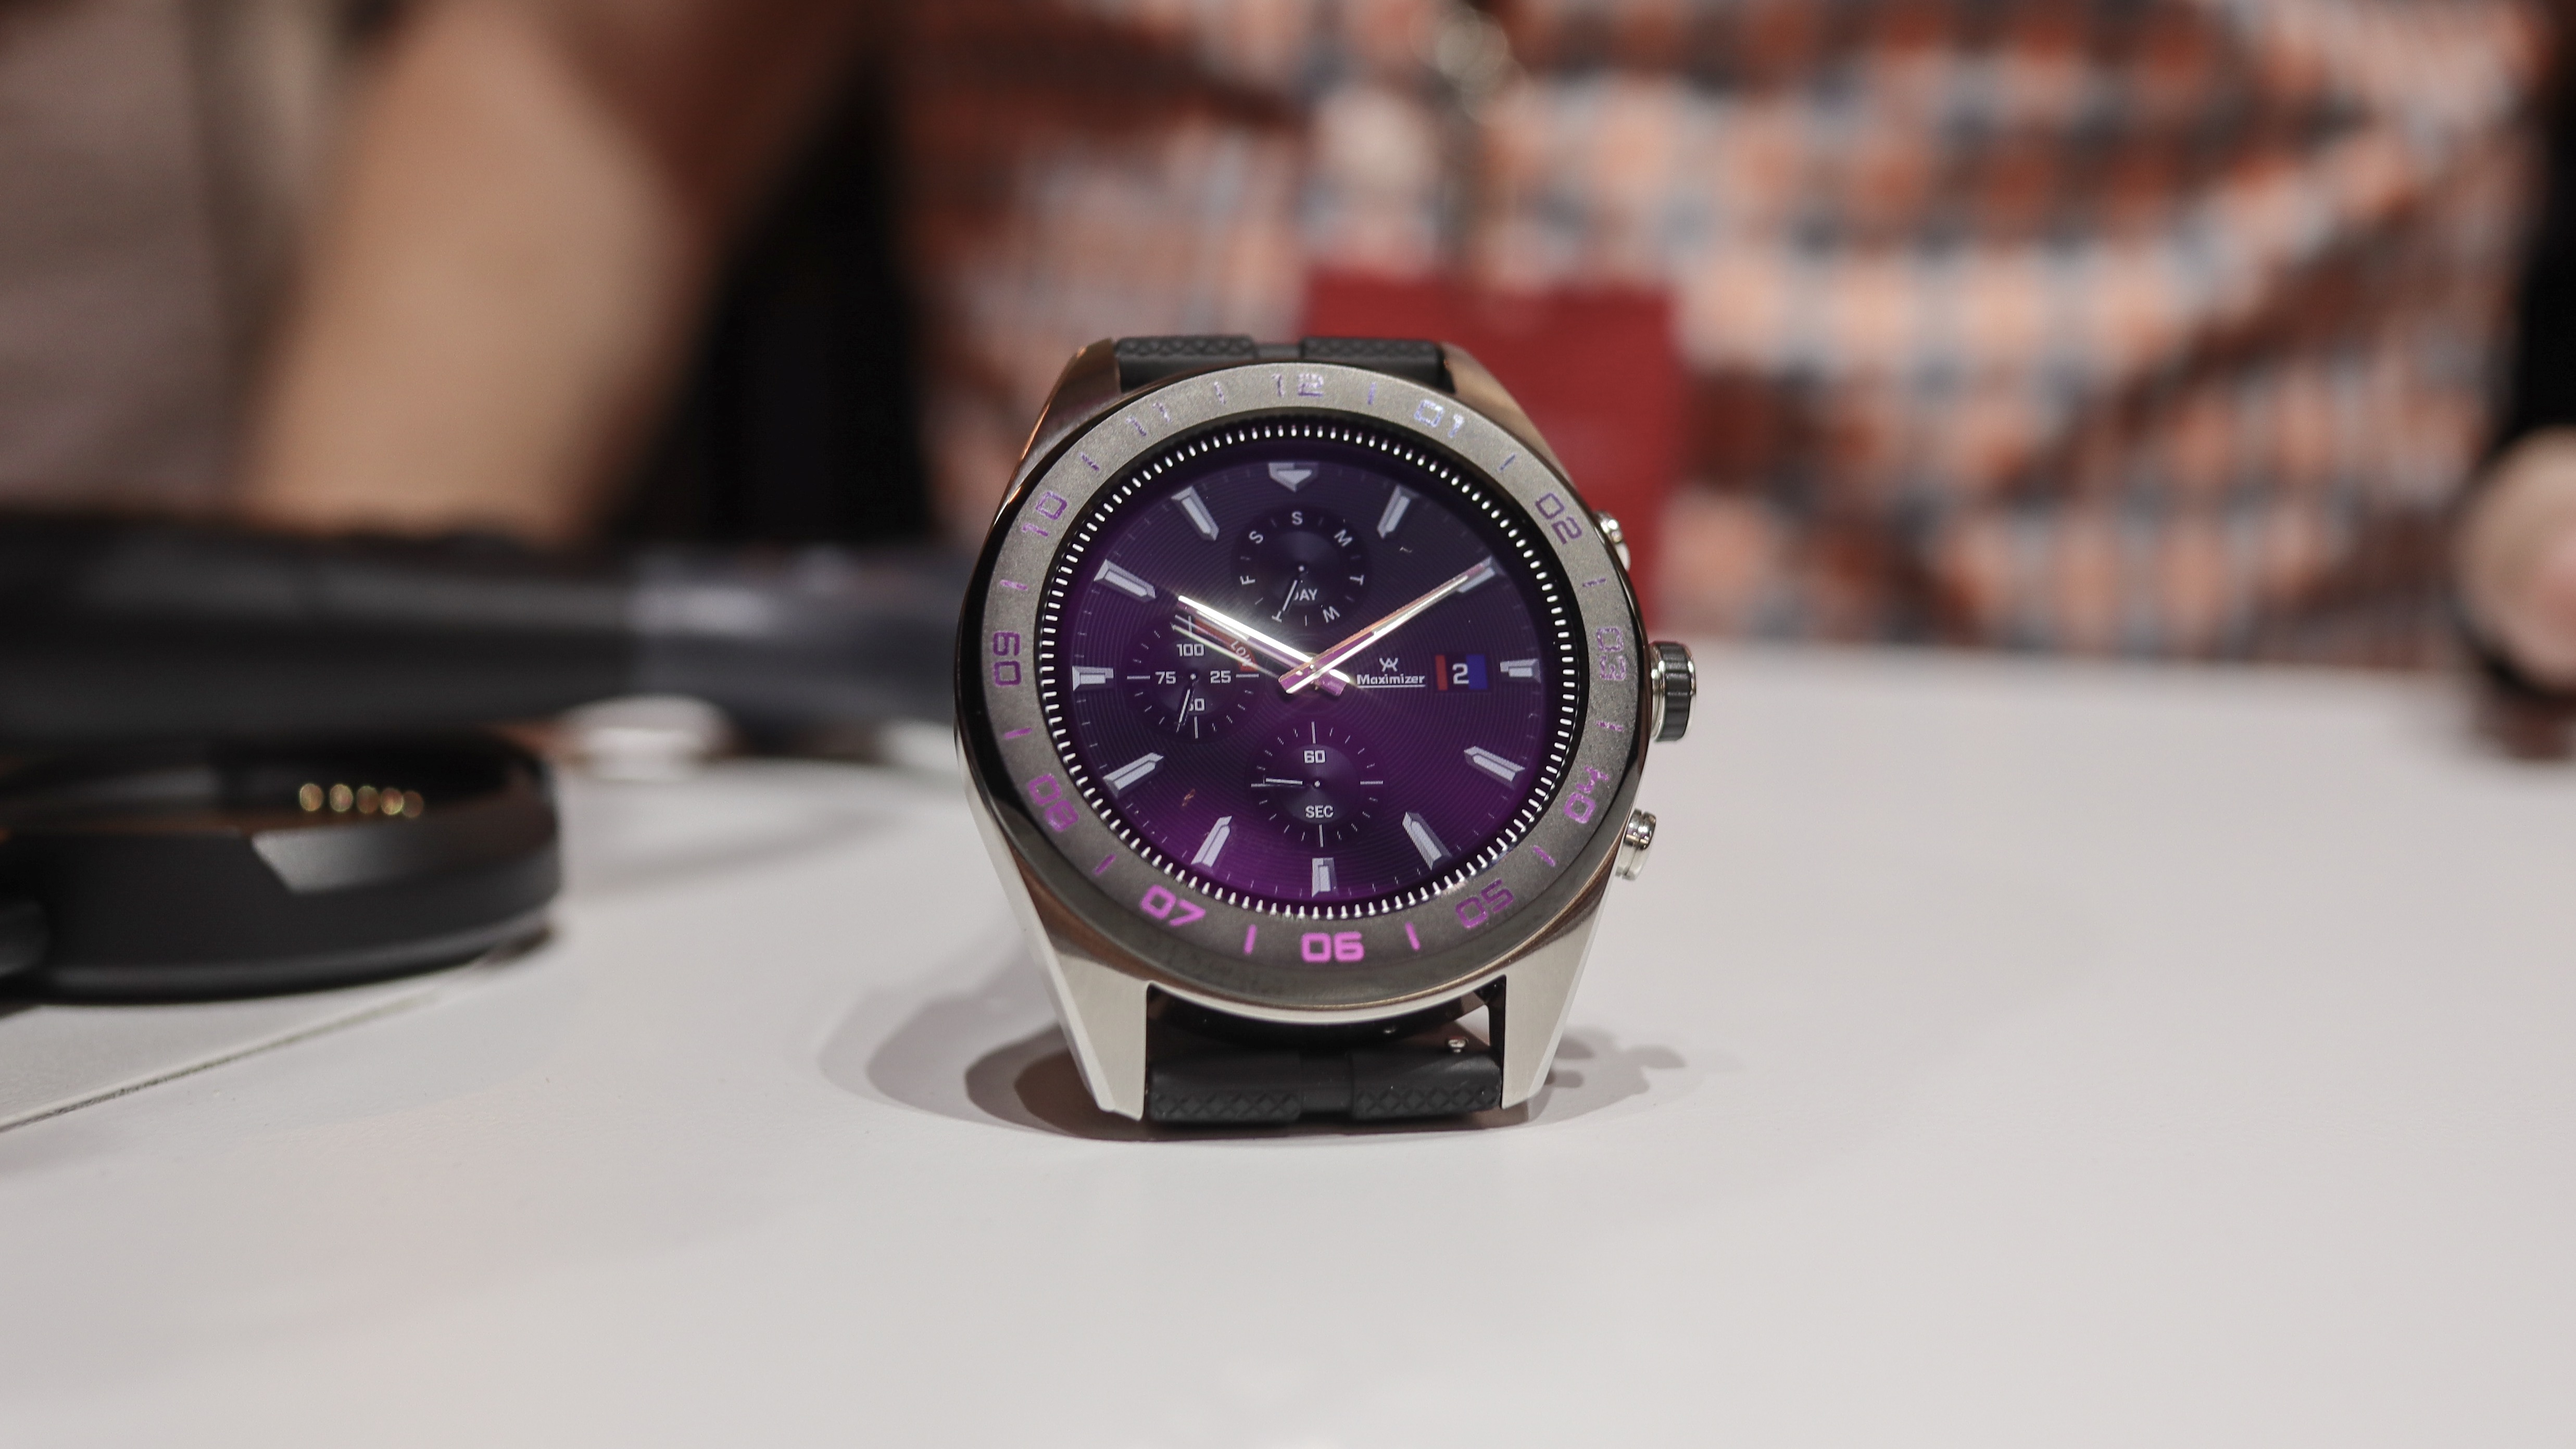 LG Watch Sport hands-on review: a smartwatch saved by Android Wear 2.0